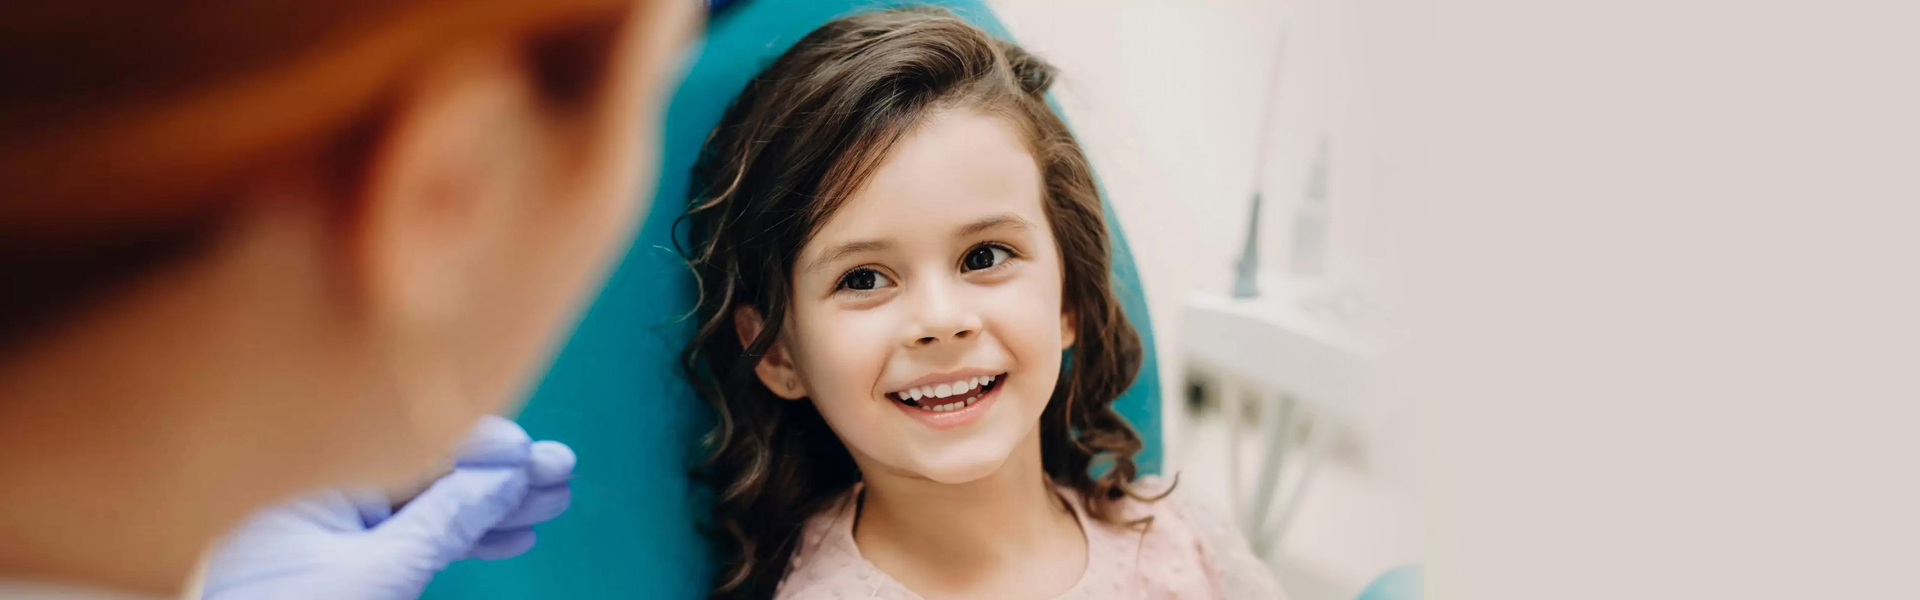 Pediatric Dentistry: Frequently Asked Questions